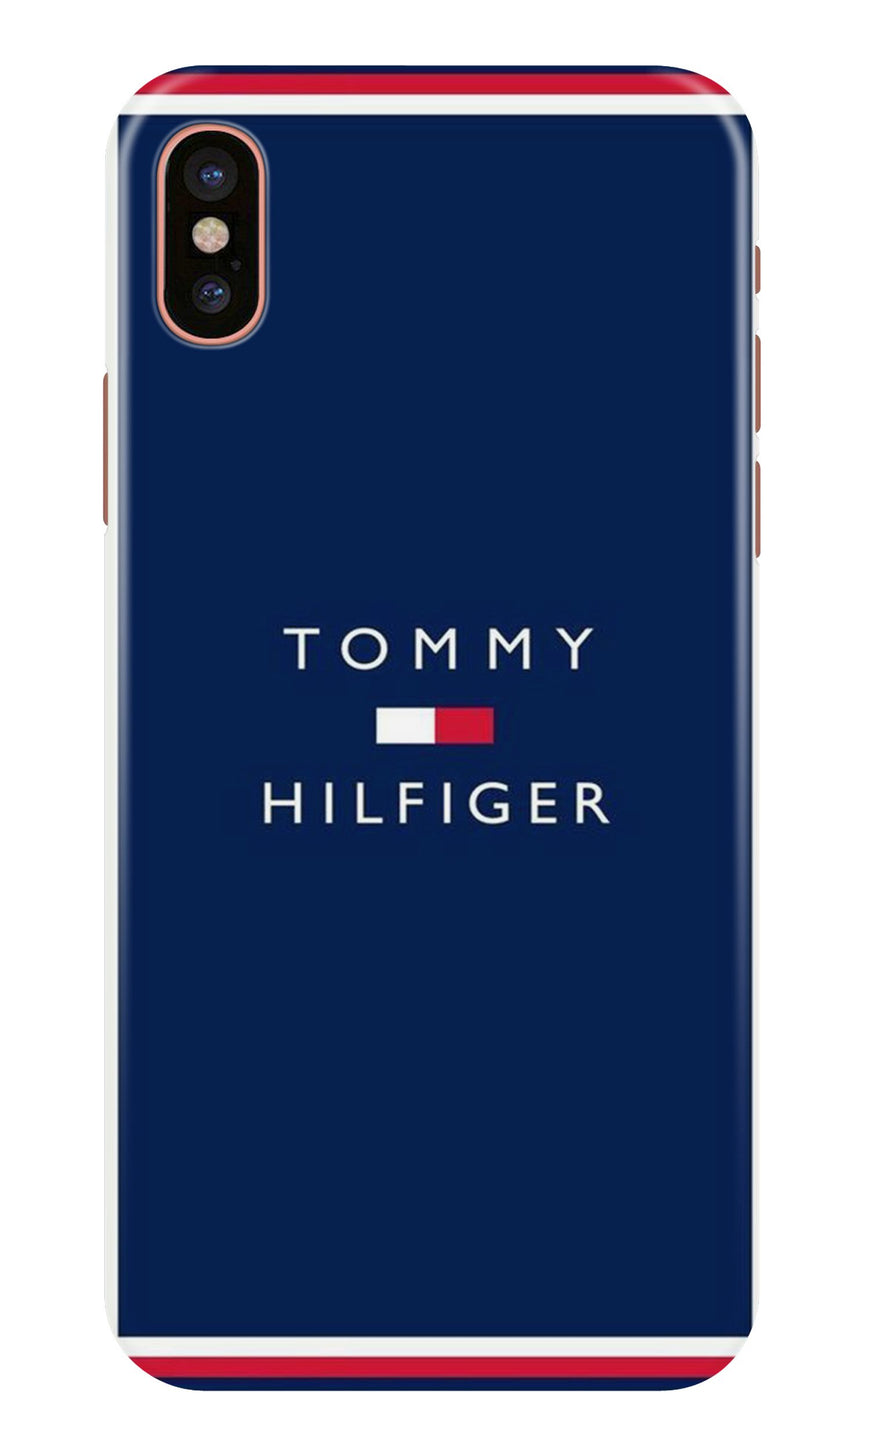 Tommy Hilfiger Case for iPhone Xs Max (Design No. 275)